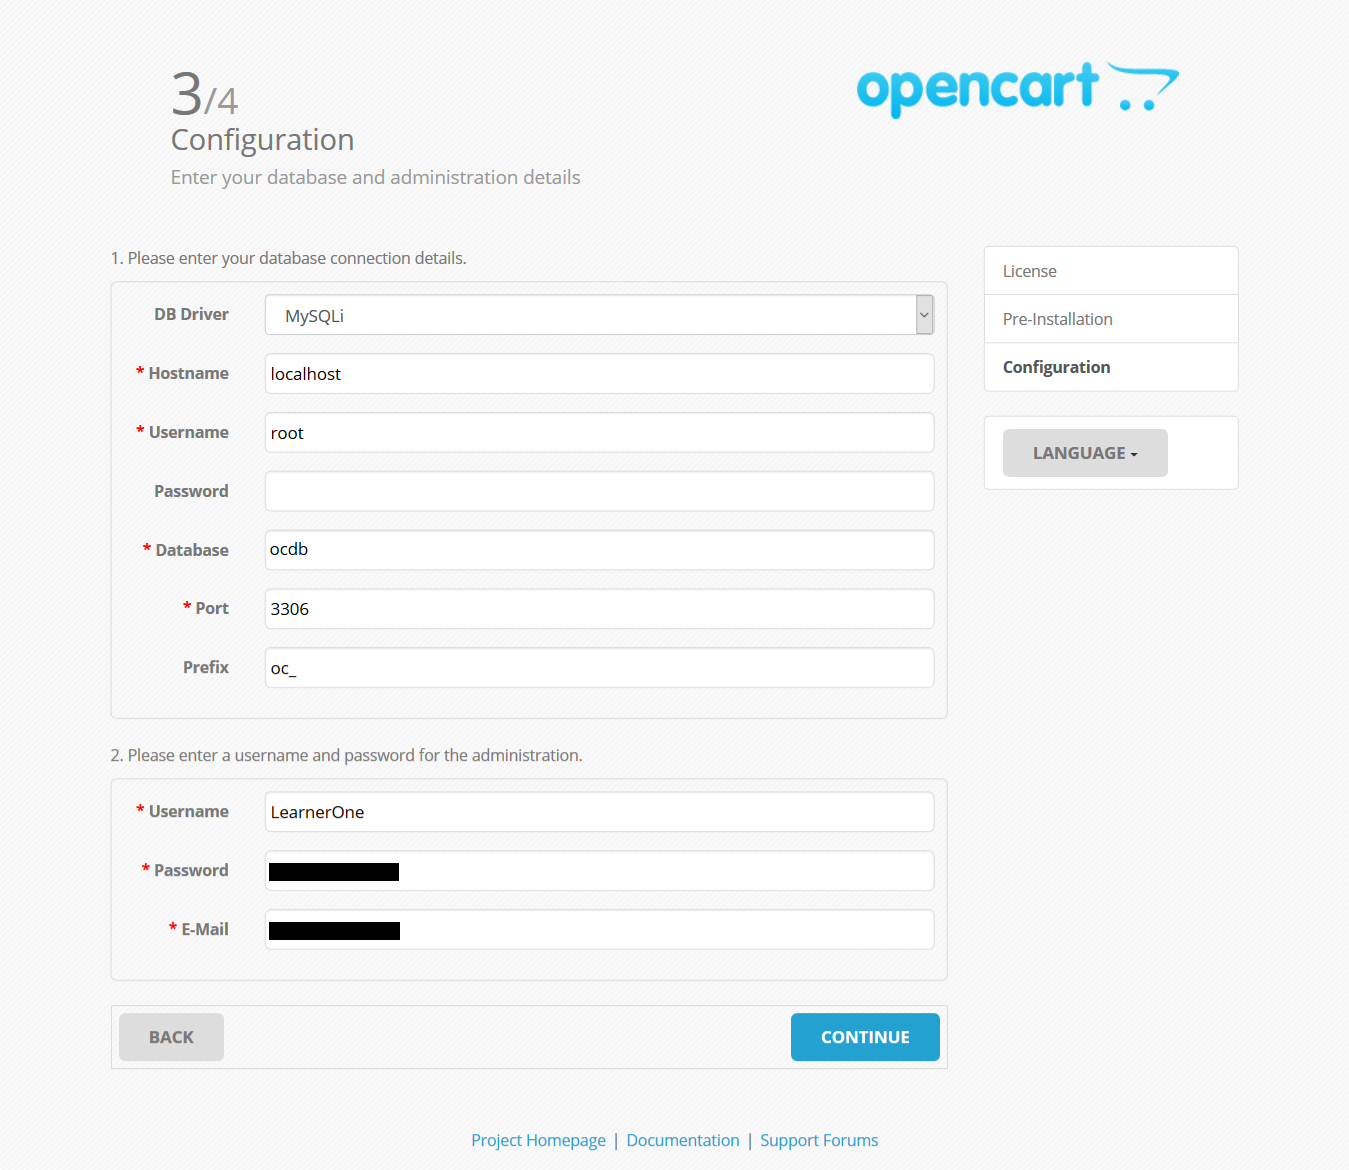 Adding configuration details for OpenCart